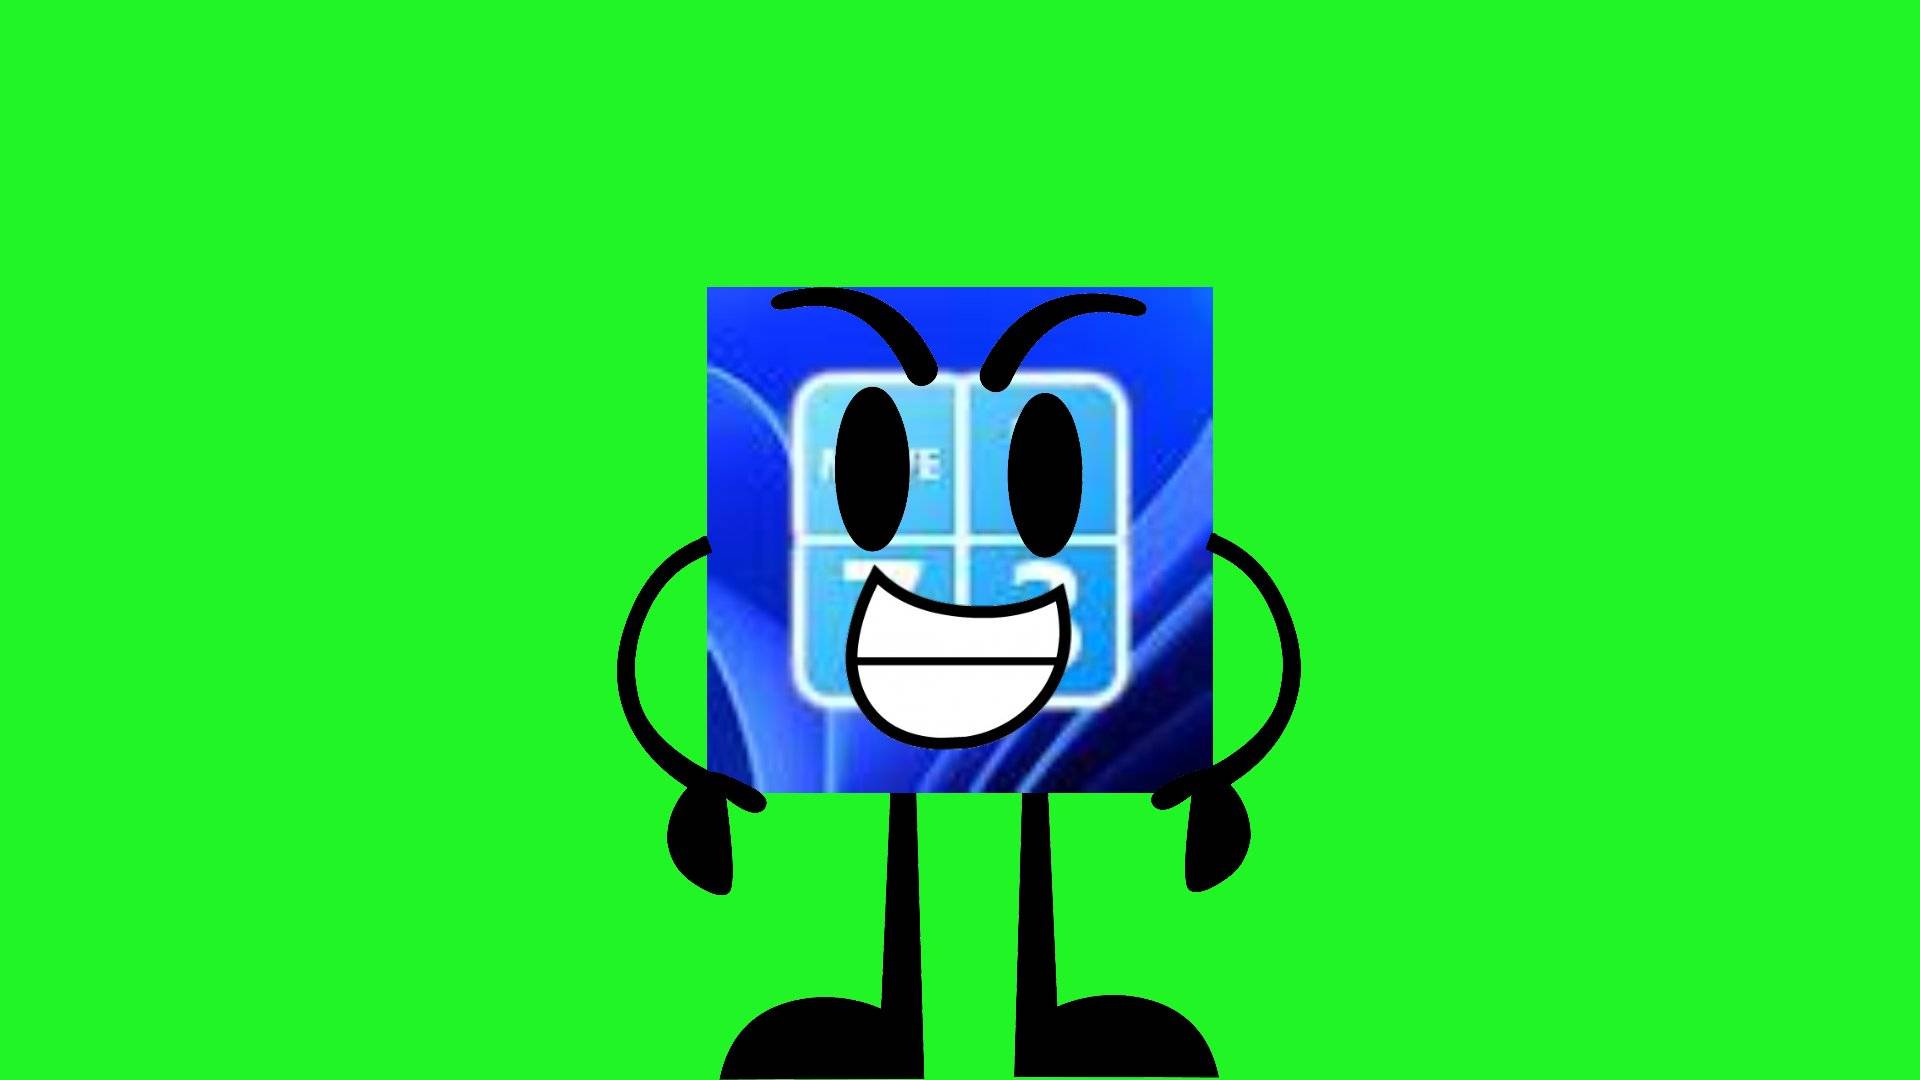 Syko In Cartoony Maker In BFDI Style! by TheBobby65 on DeviantArt